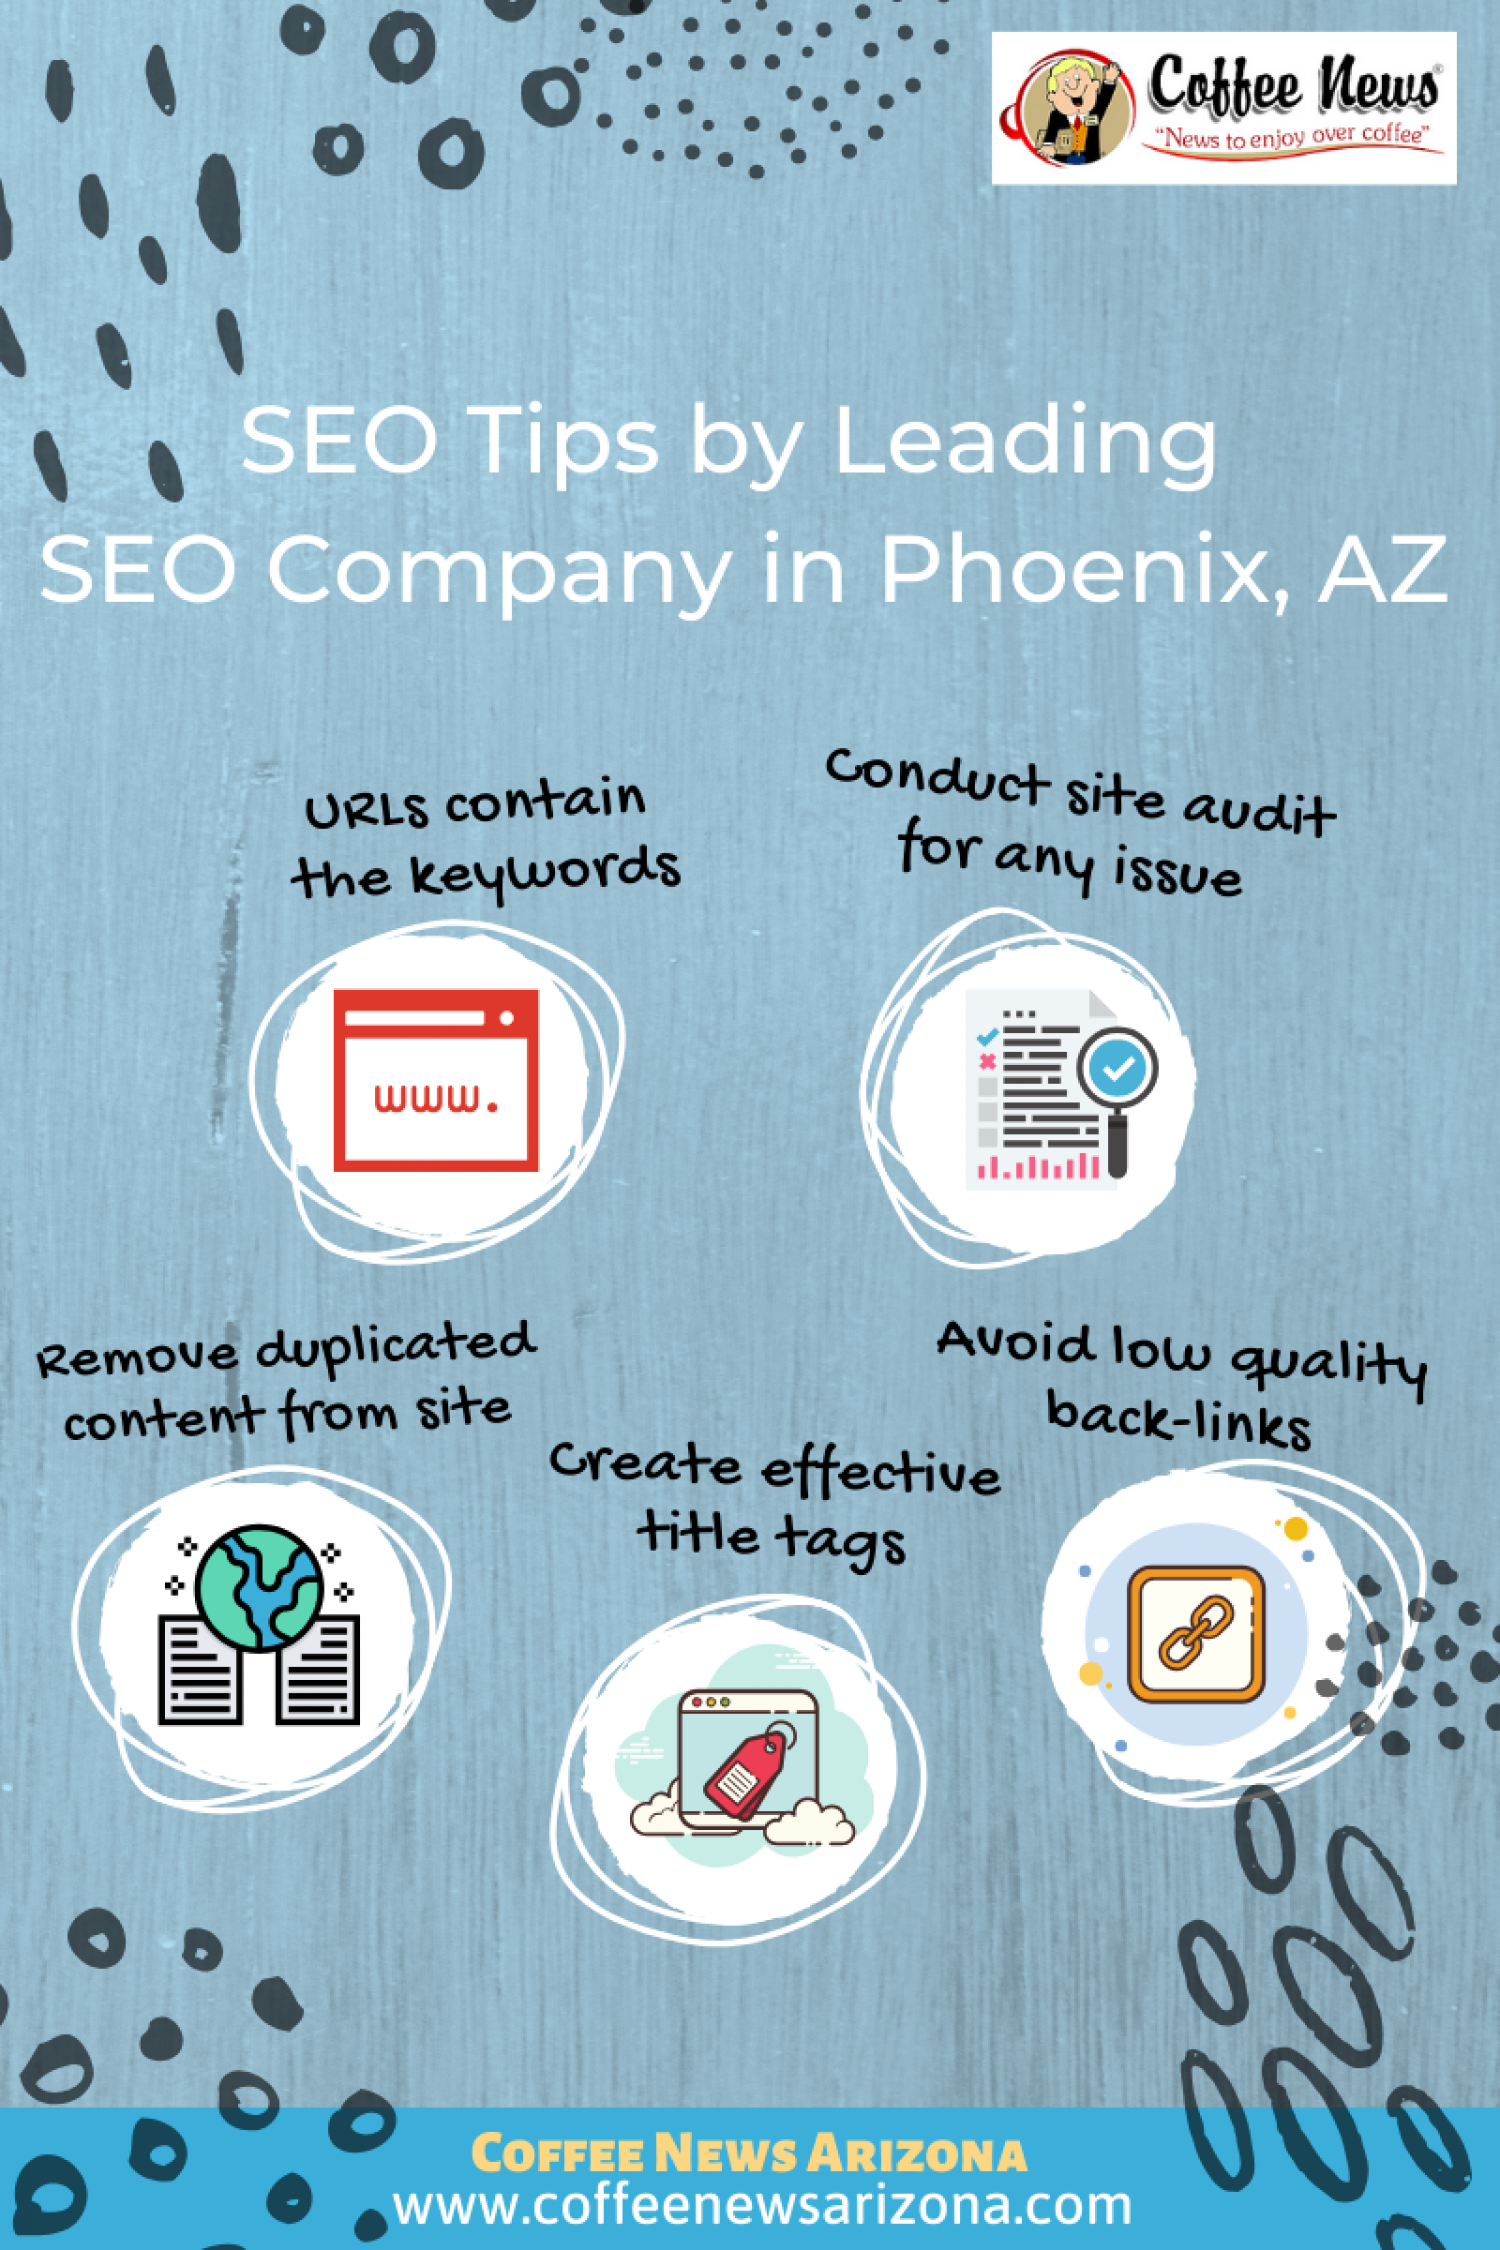 SEO Tips by Leading SEO company in Phoenix Infographic